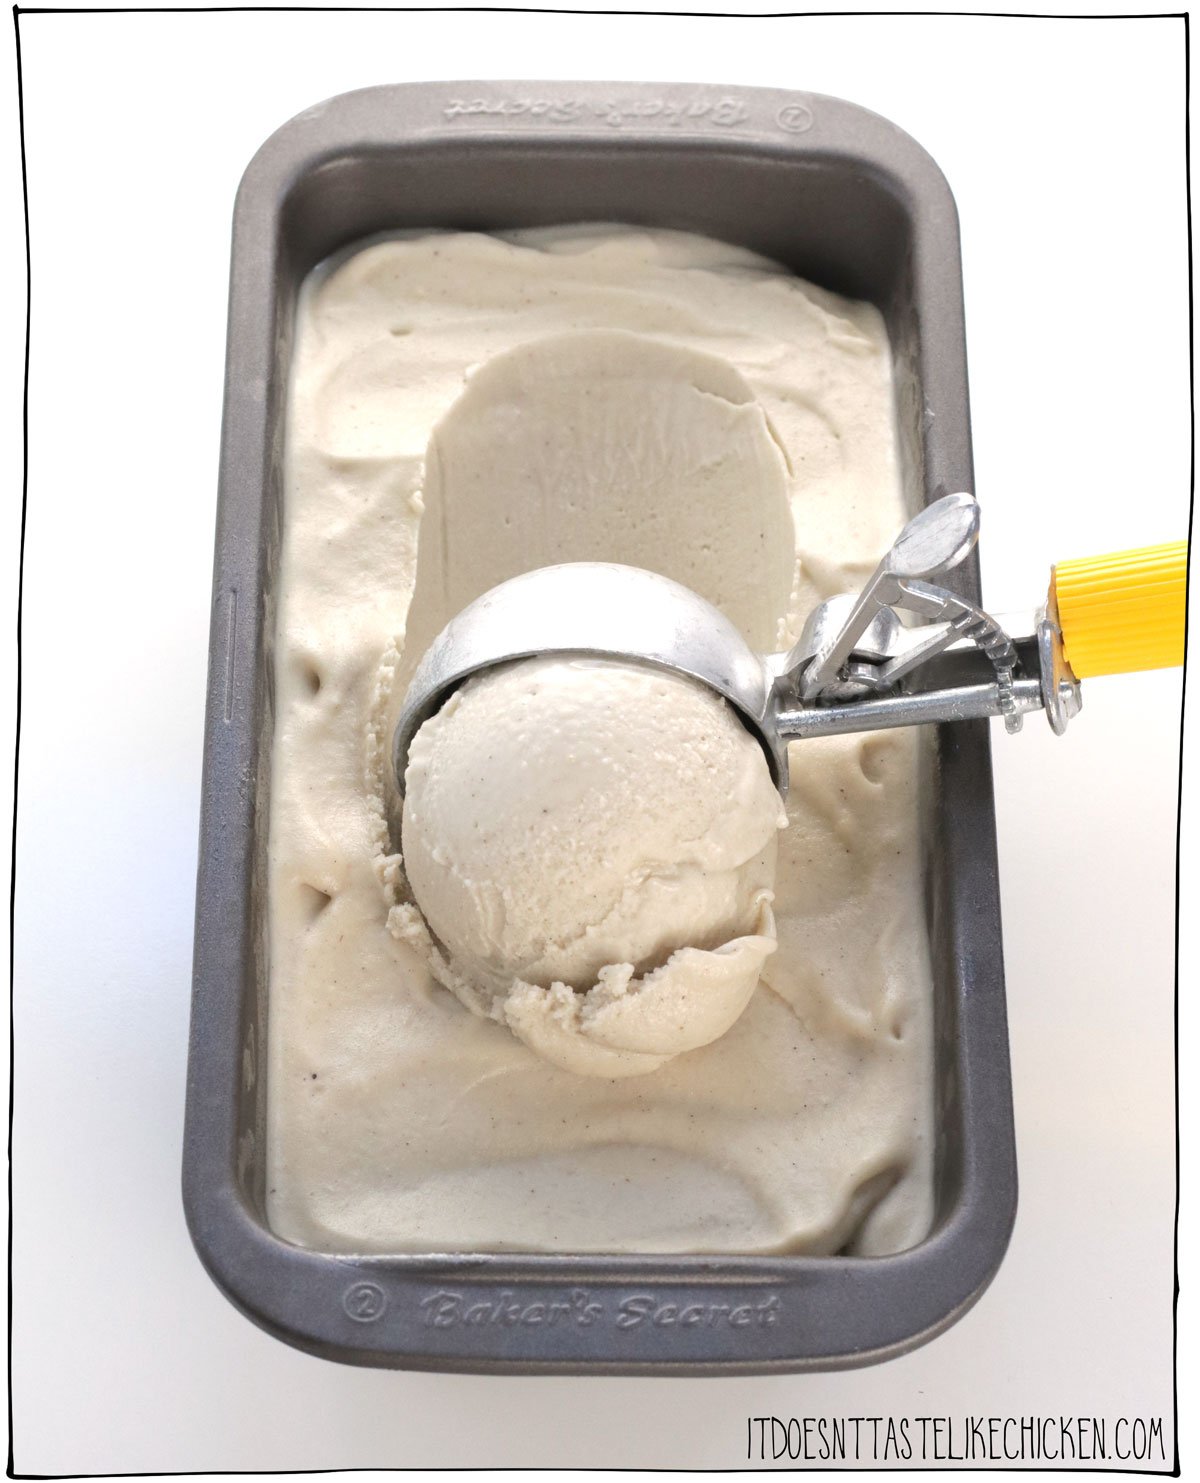 You can make homemade ice cream without an ice cream machine! This no-churn method requires just two tools, an ice cube tray, and a blender. Use this simple technique with any homemade ice cream recipe to make creamy homemade ice cream in a snap! #itdoesnttastelikechicken #icecream